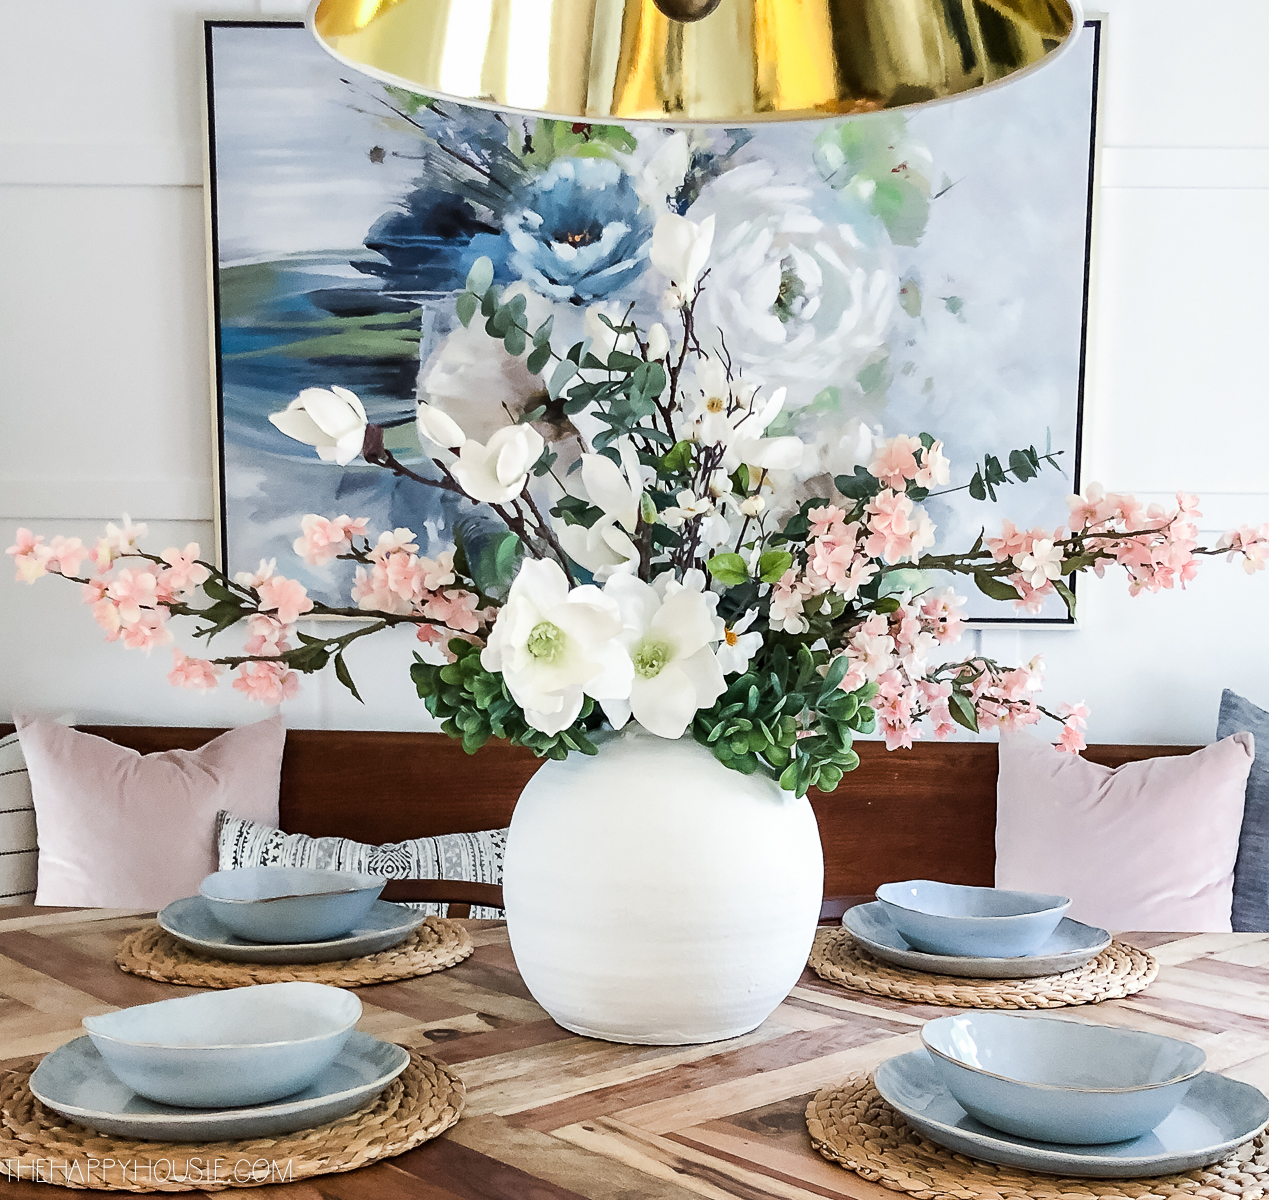 There is a white vase on the dining room table with white and pink flowers.